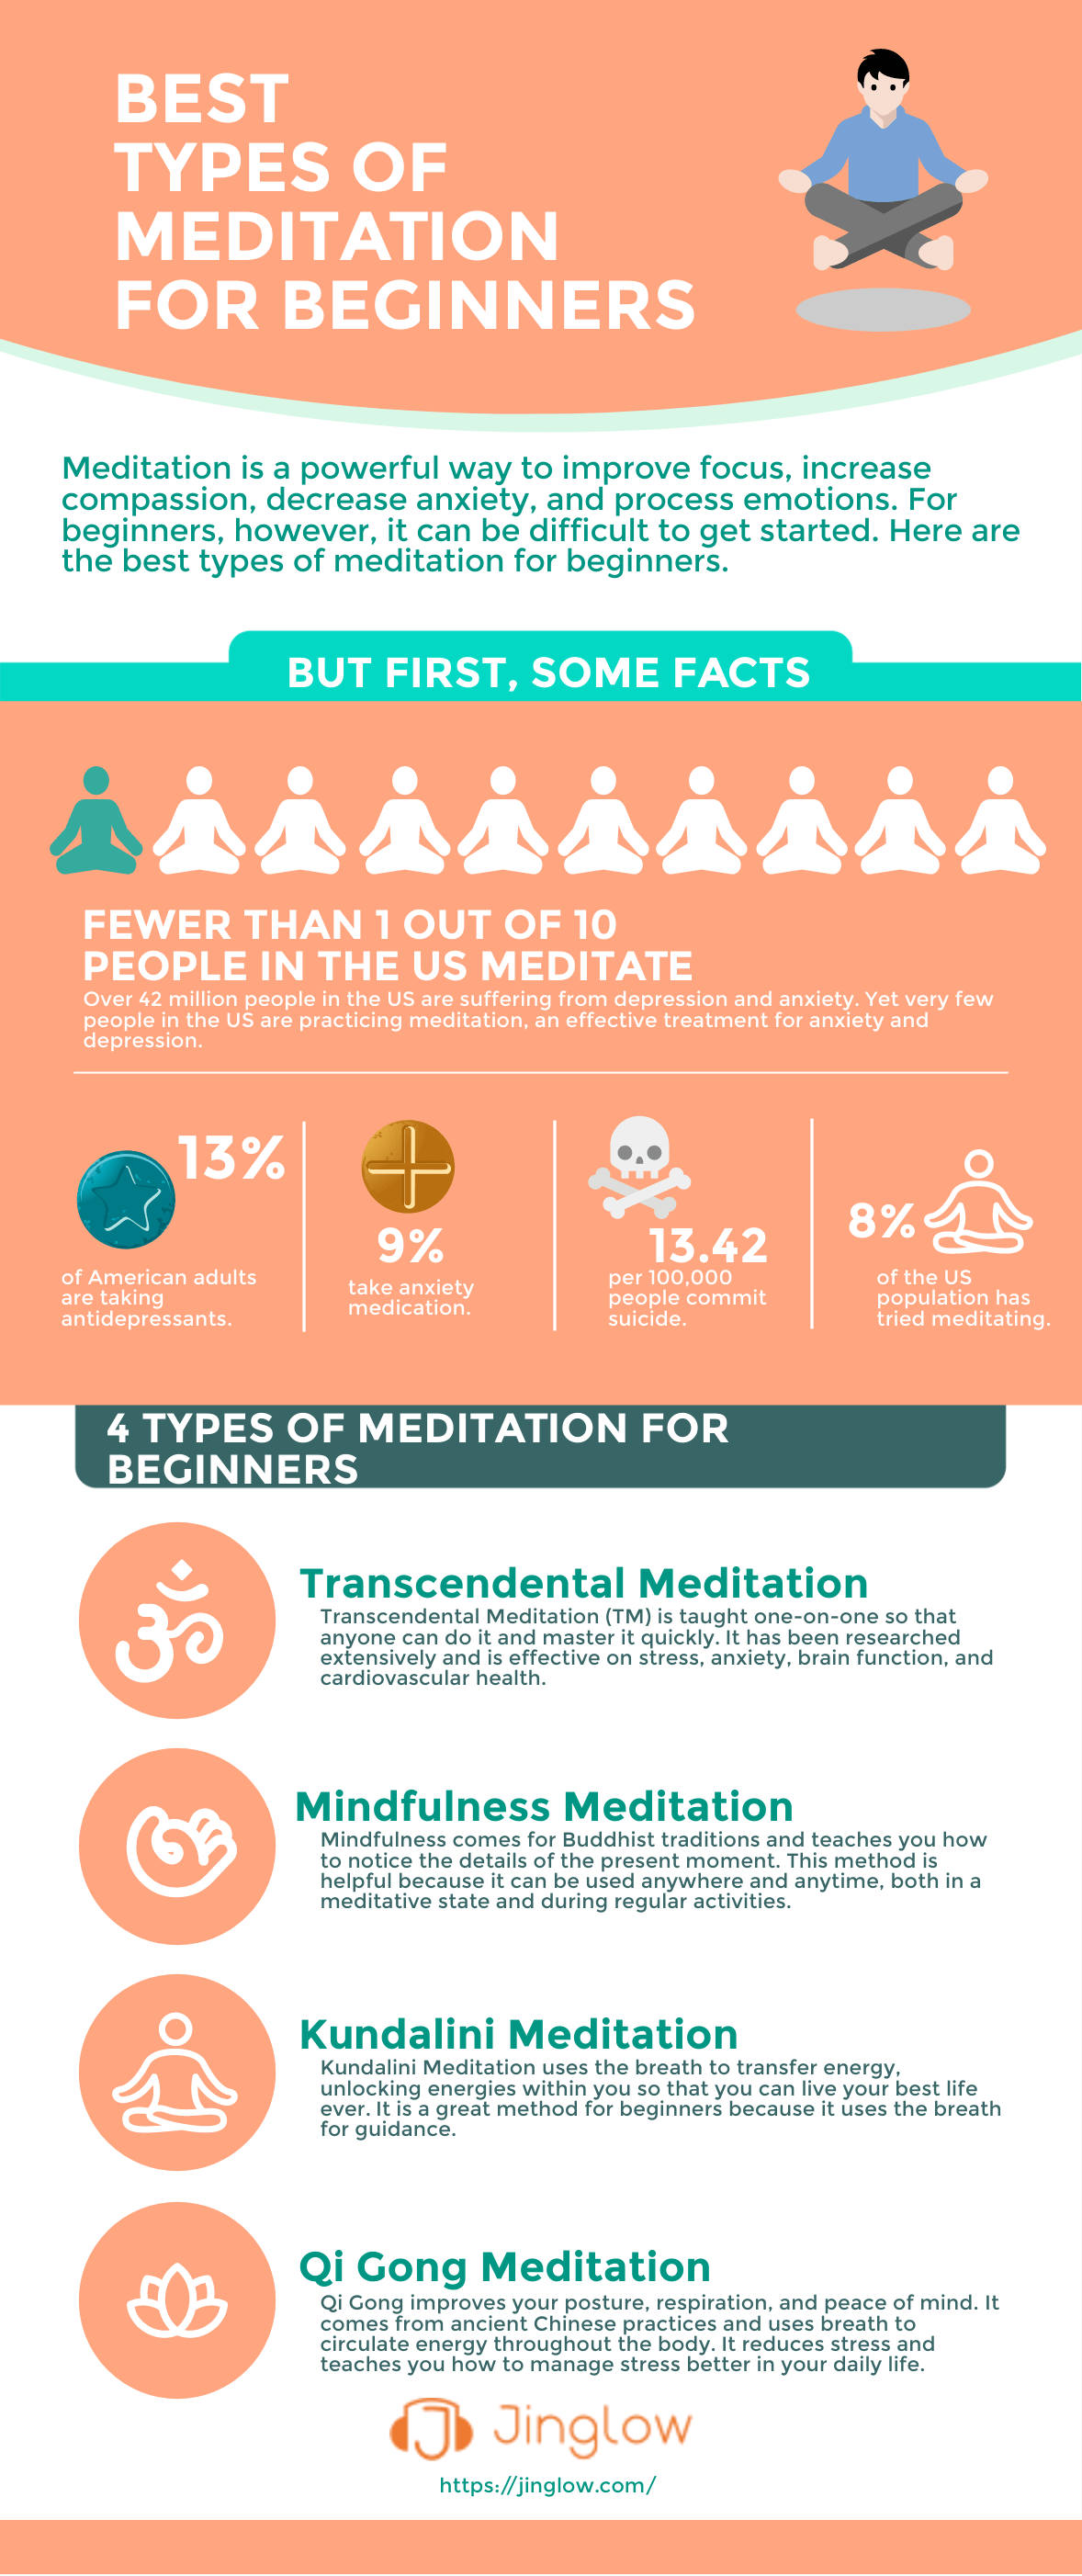 Meditation for Beginners infographic